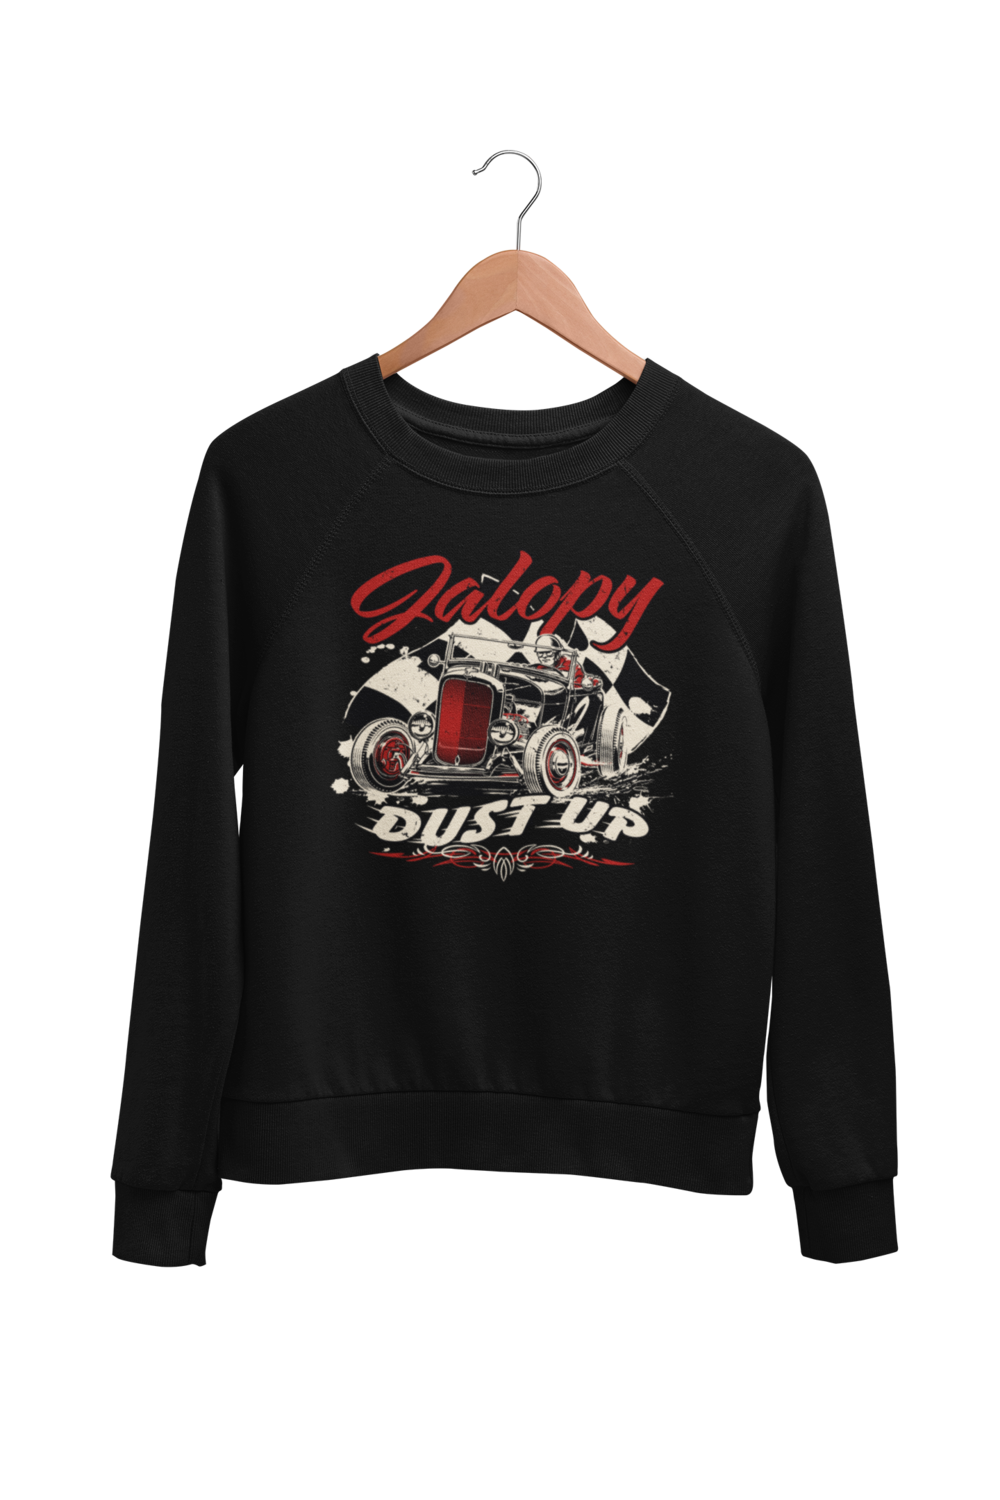 JALOPY DUST UP SWEATSHIRT UNISEX by BY Ger "Dutch Courage" Peters artwork